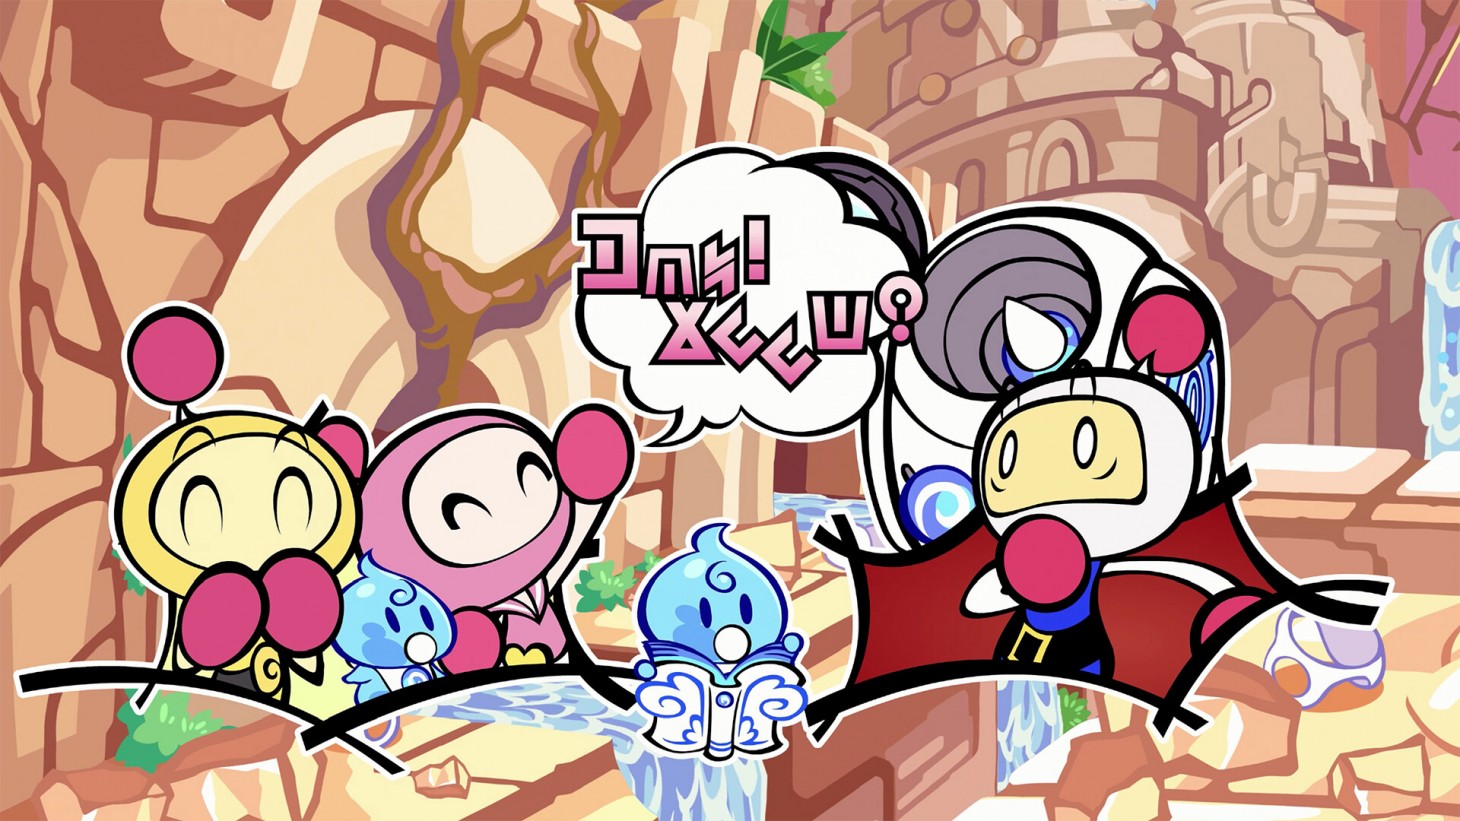 Super Bomberman R 2 Review - A Disappointing Dud - Game Informer